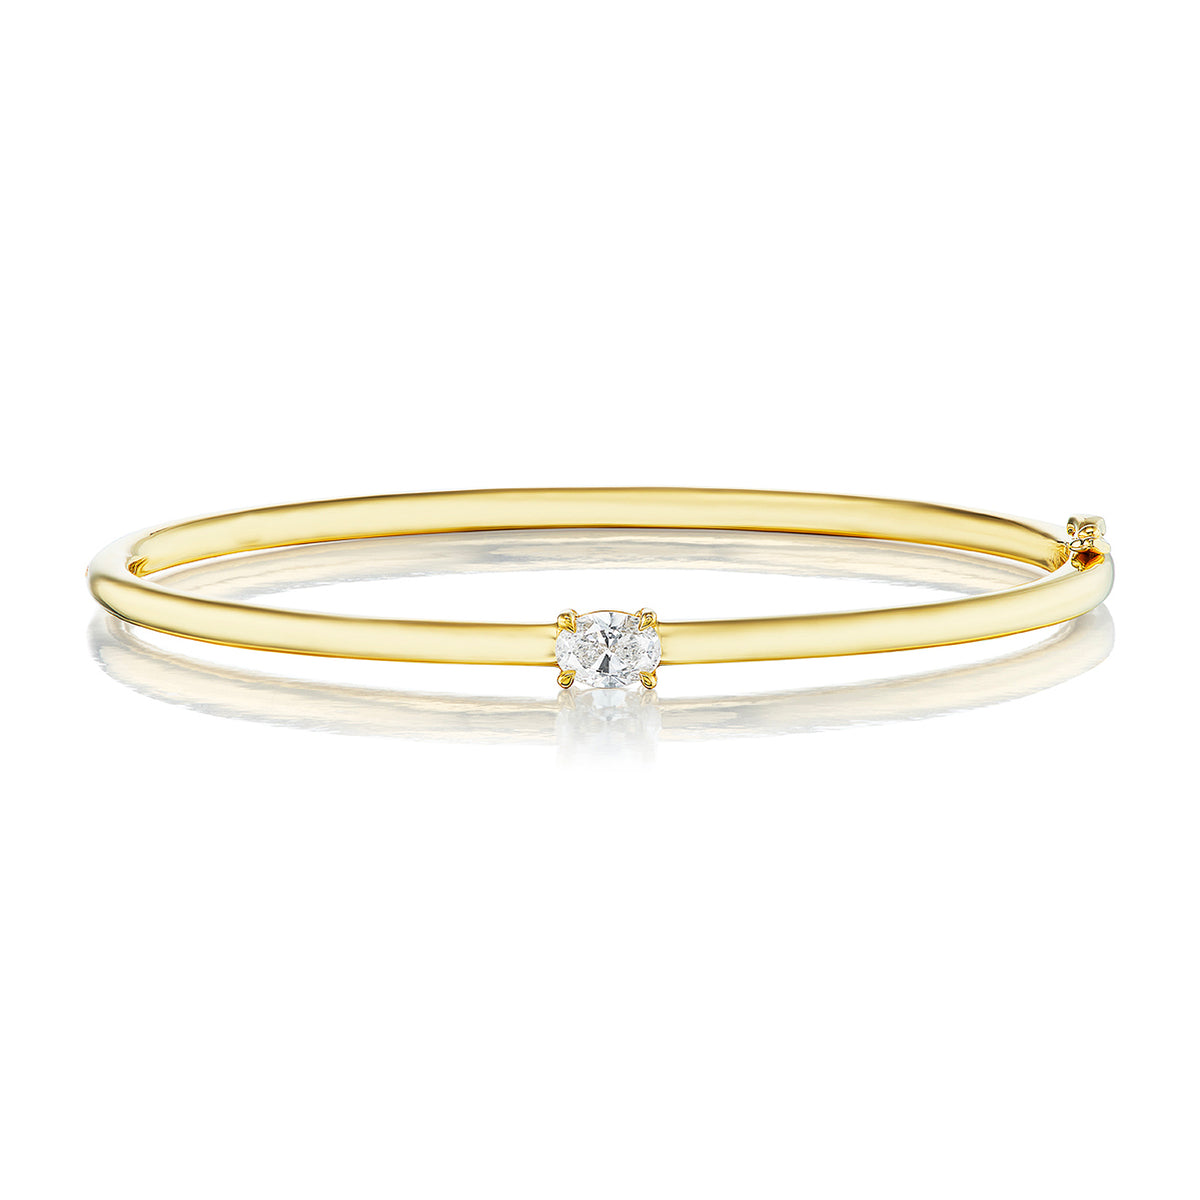 East-West Oval Solitaire Diamond Bangle